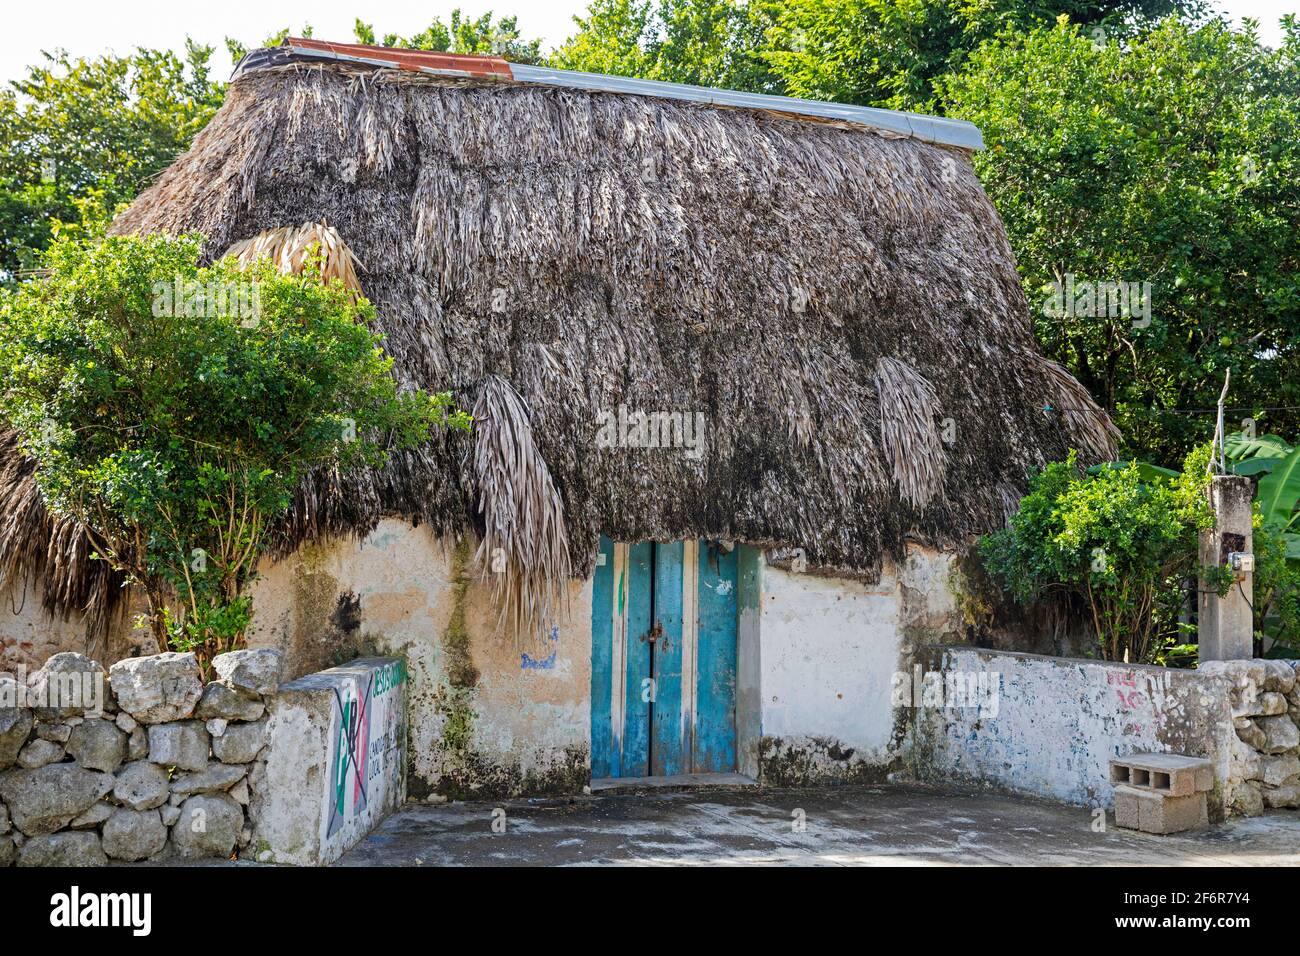 Traditional thatched house / hut with palapa roof of indigenous Maya Indians on the countryside near Mérida, Yucatán, Mexico Stock Photo